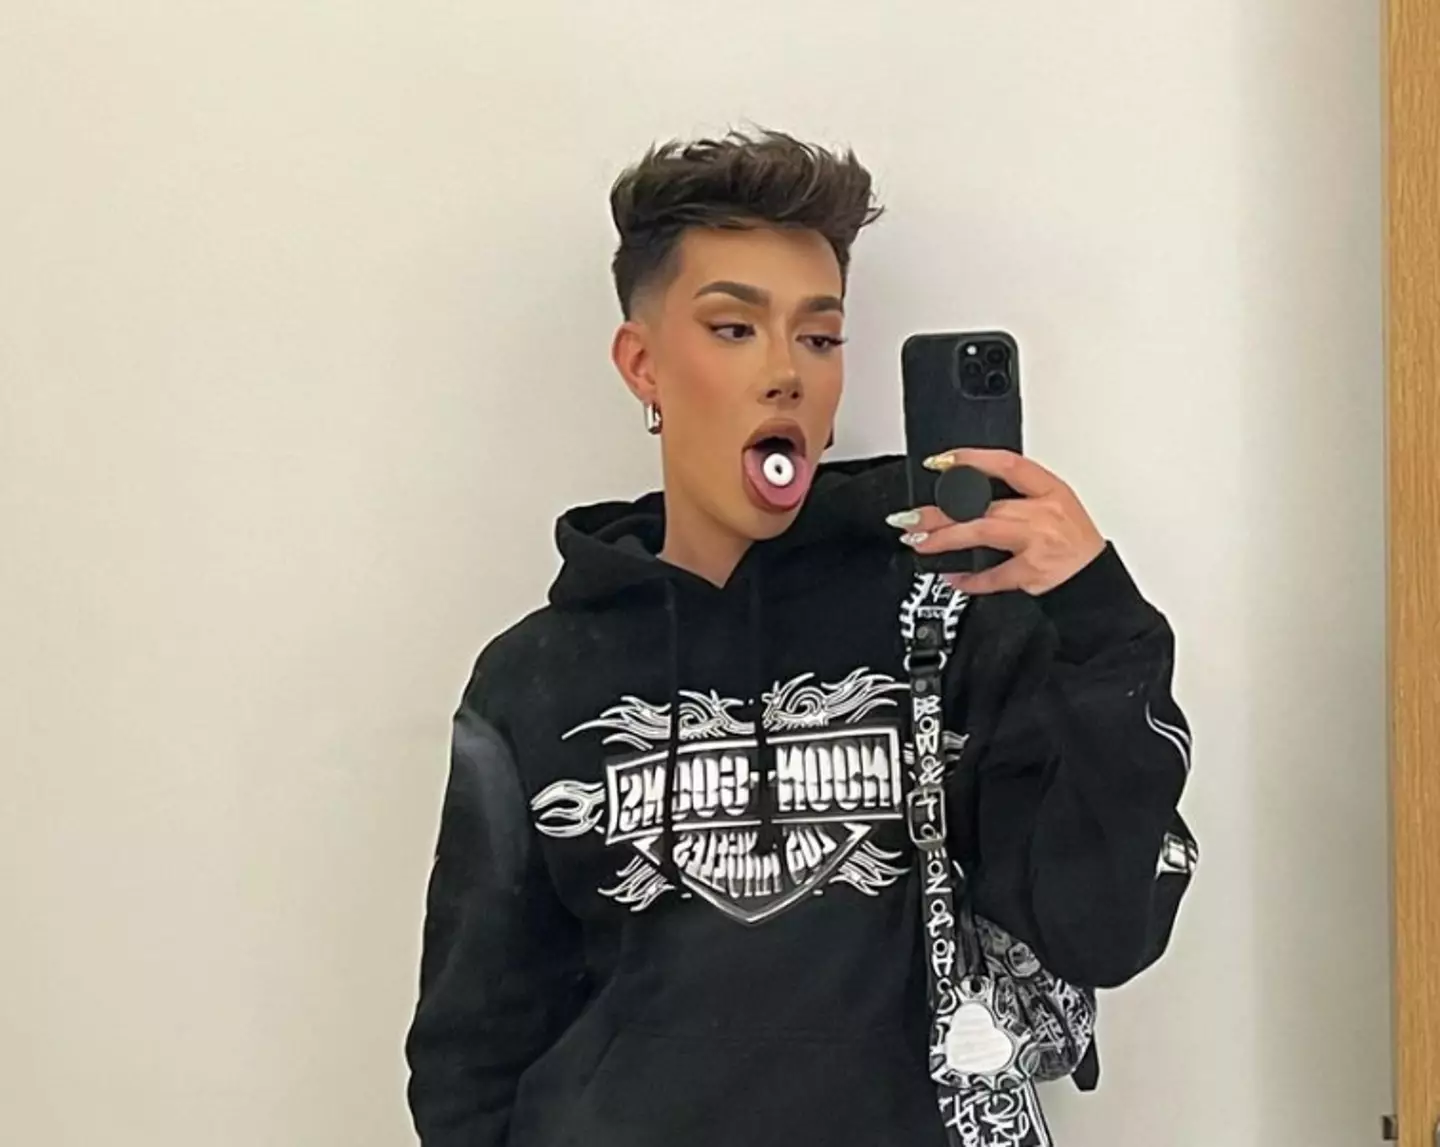 James Charles has claimed he didn't know the teens were underage.